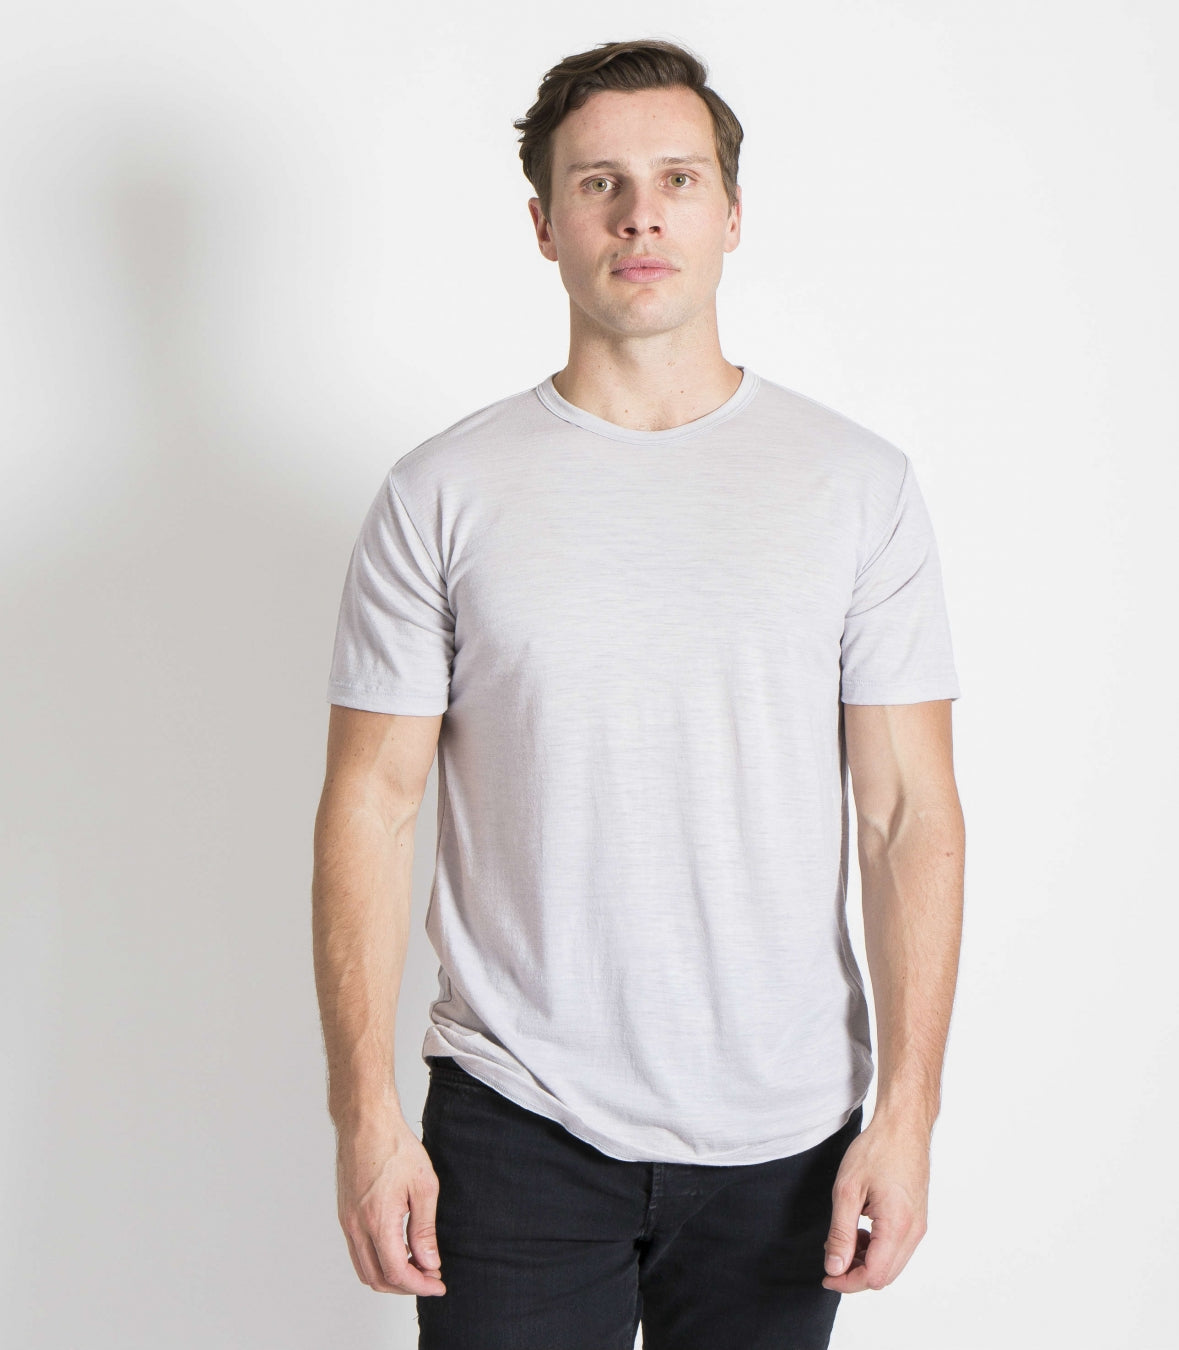 Wool Crew Neck SS - Additional Colors Made in USA | RAMBLERS WAY